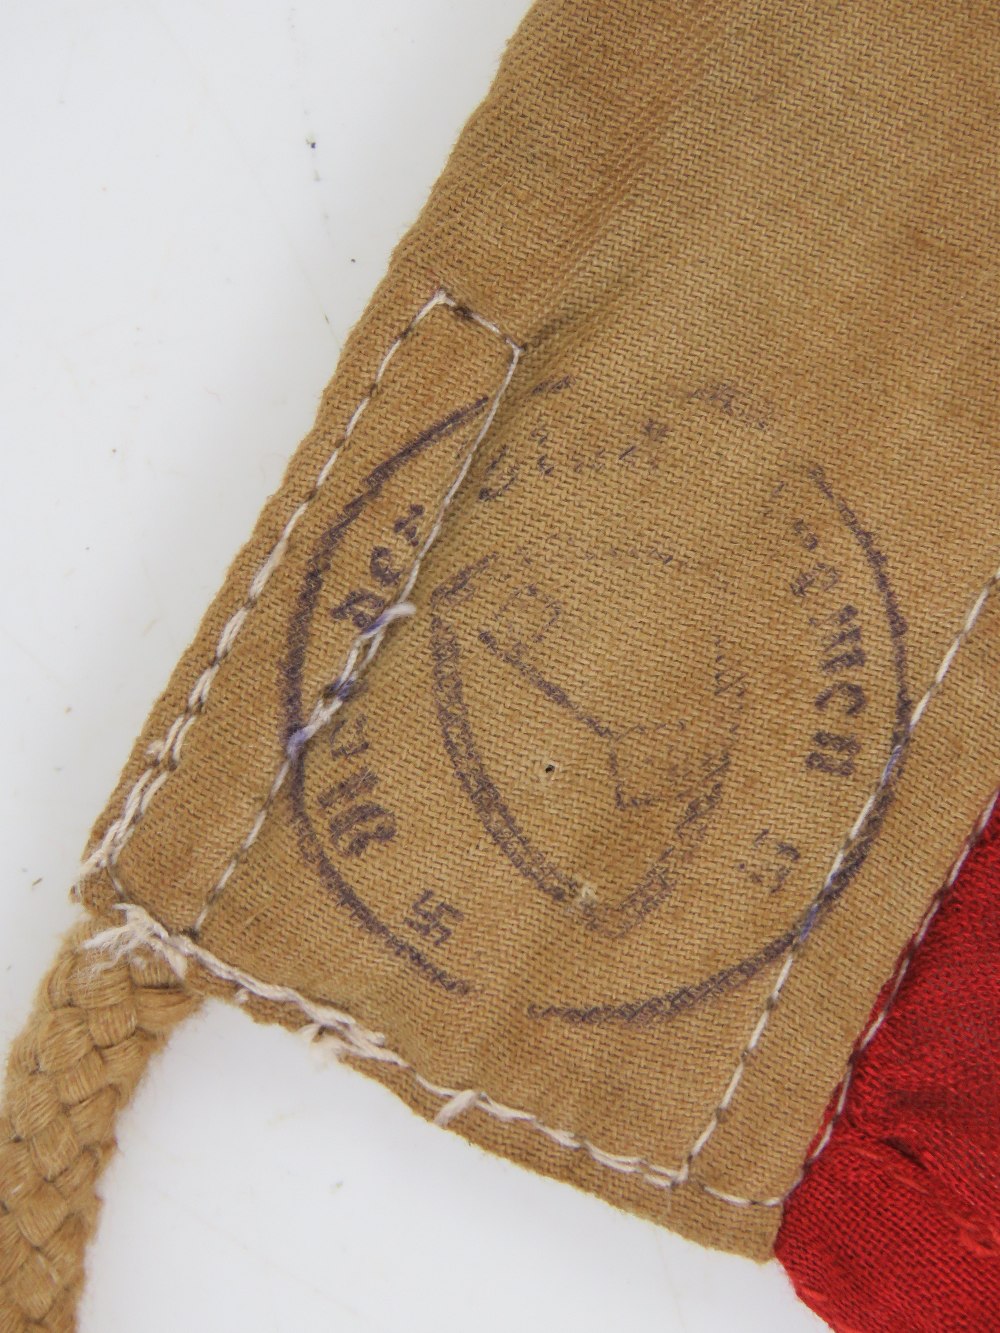 A WWII German Riecheskrieg Flag with maker's mark for Karl Turpe & Co. Magdeburg. - Image 3 of 3